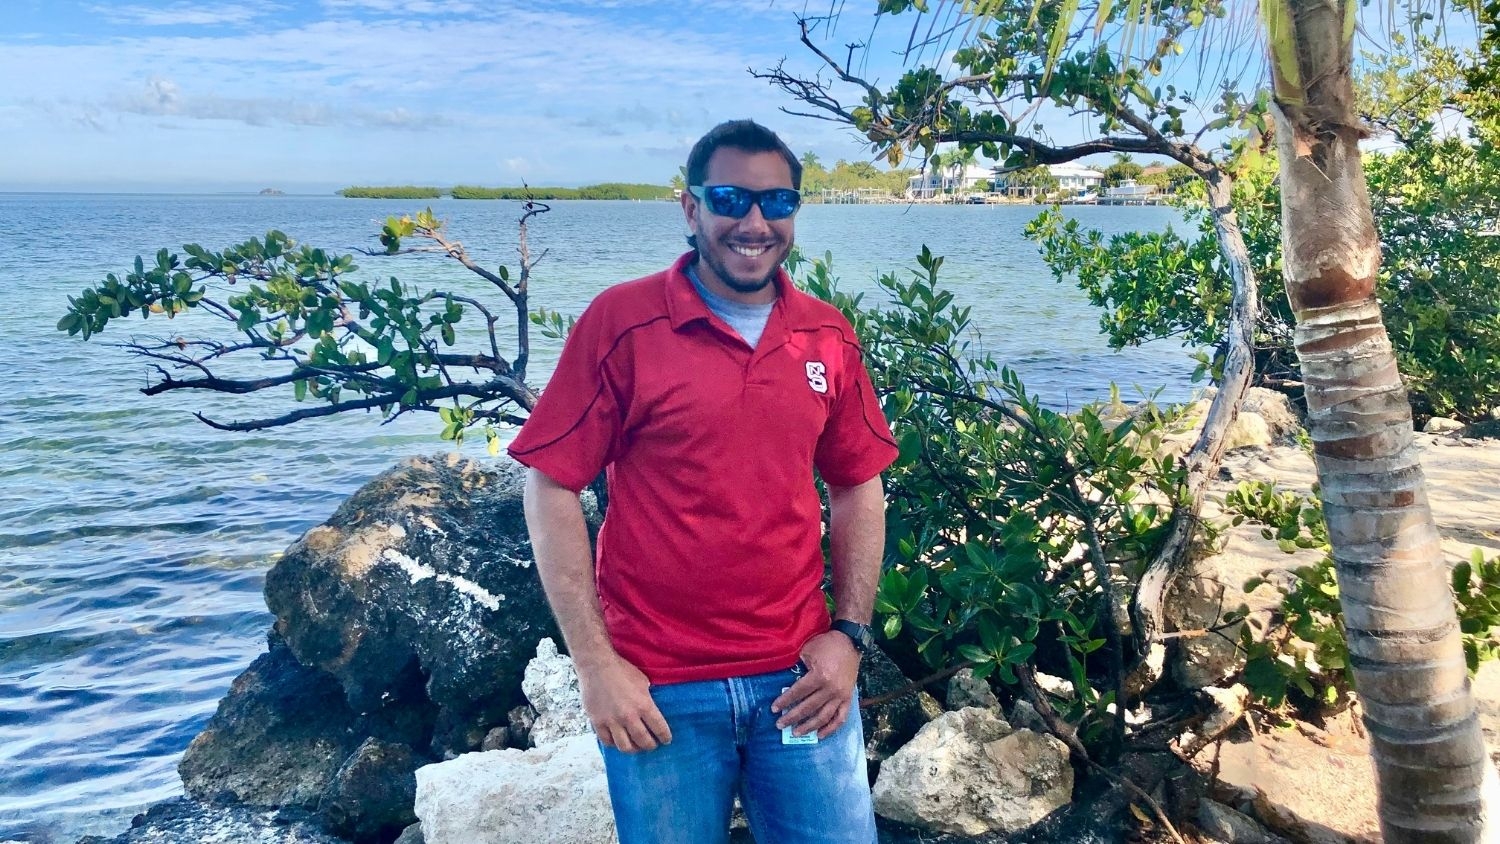 Daniel Parobok in NC State shirt in front of ocean and tropical tree - Five Questions with Environmental Planner and Biologist Daniel Parobok - College of Natural Resources News NC State University